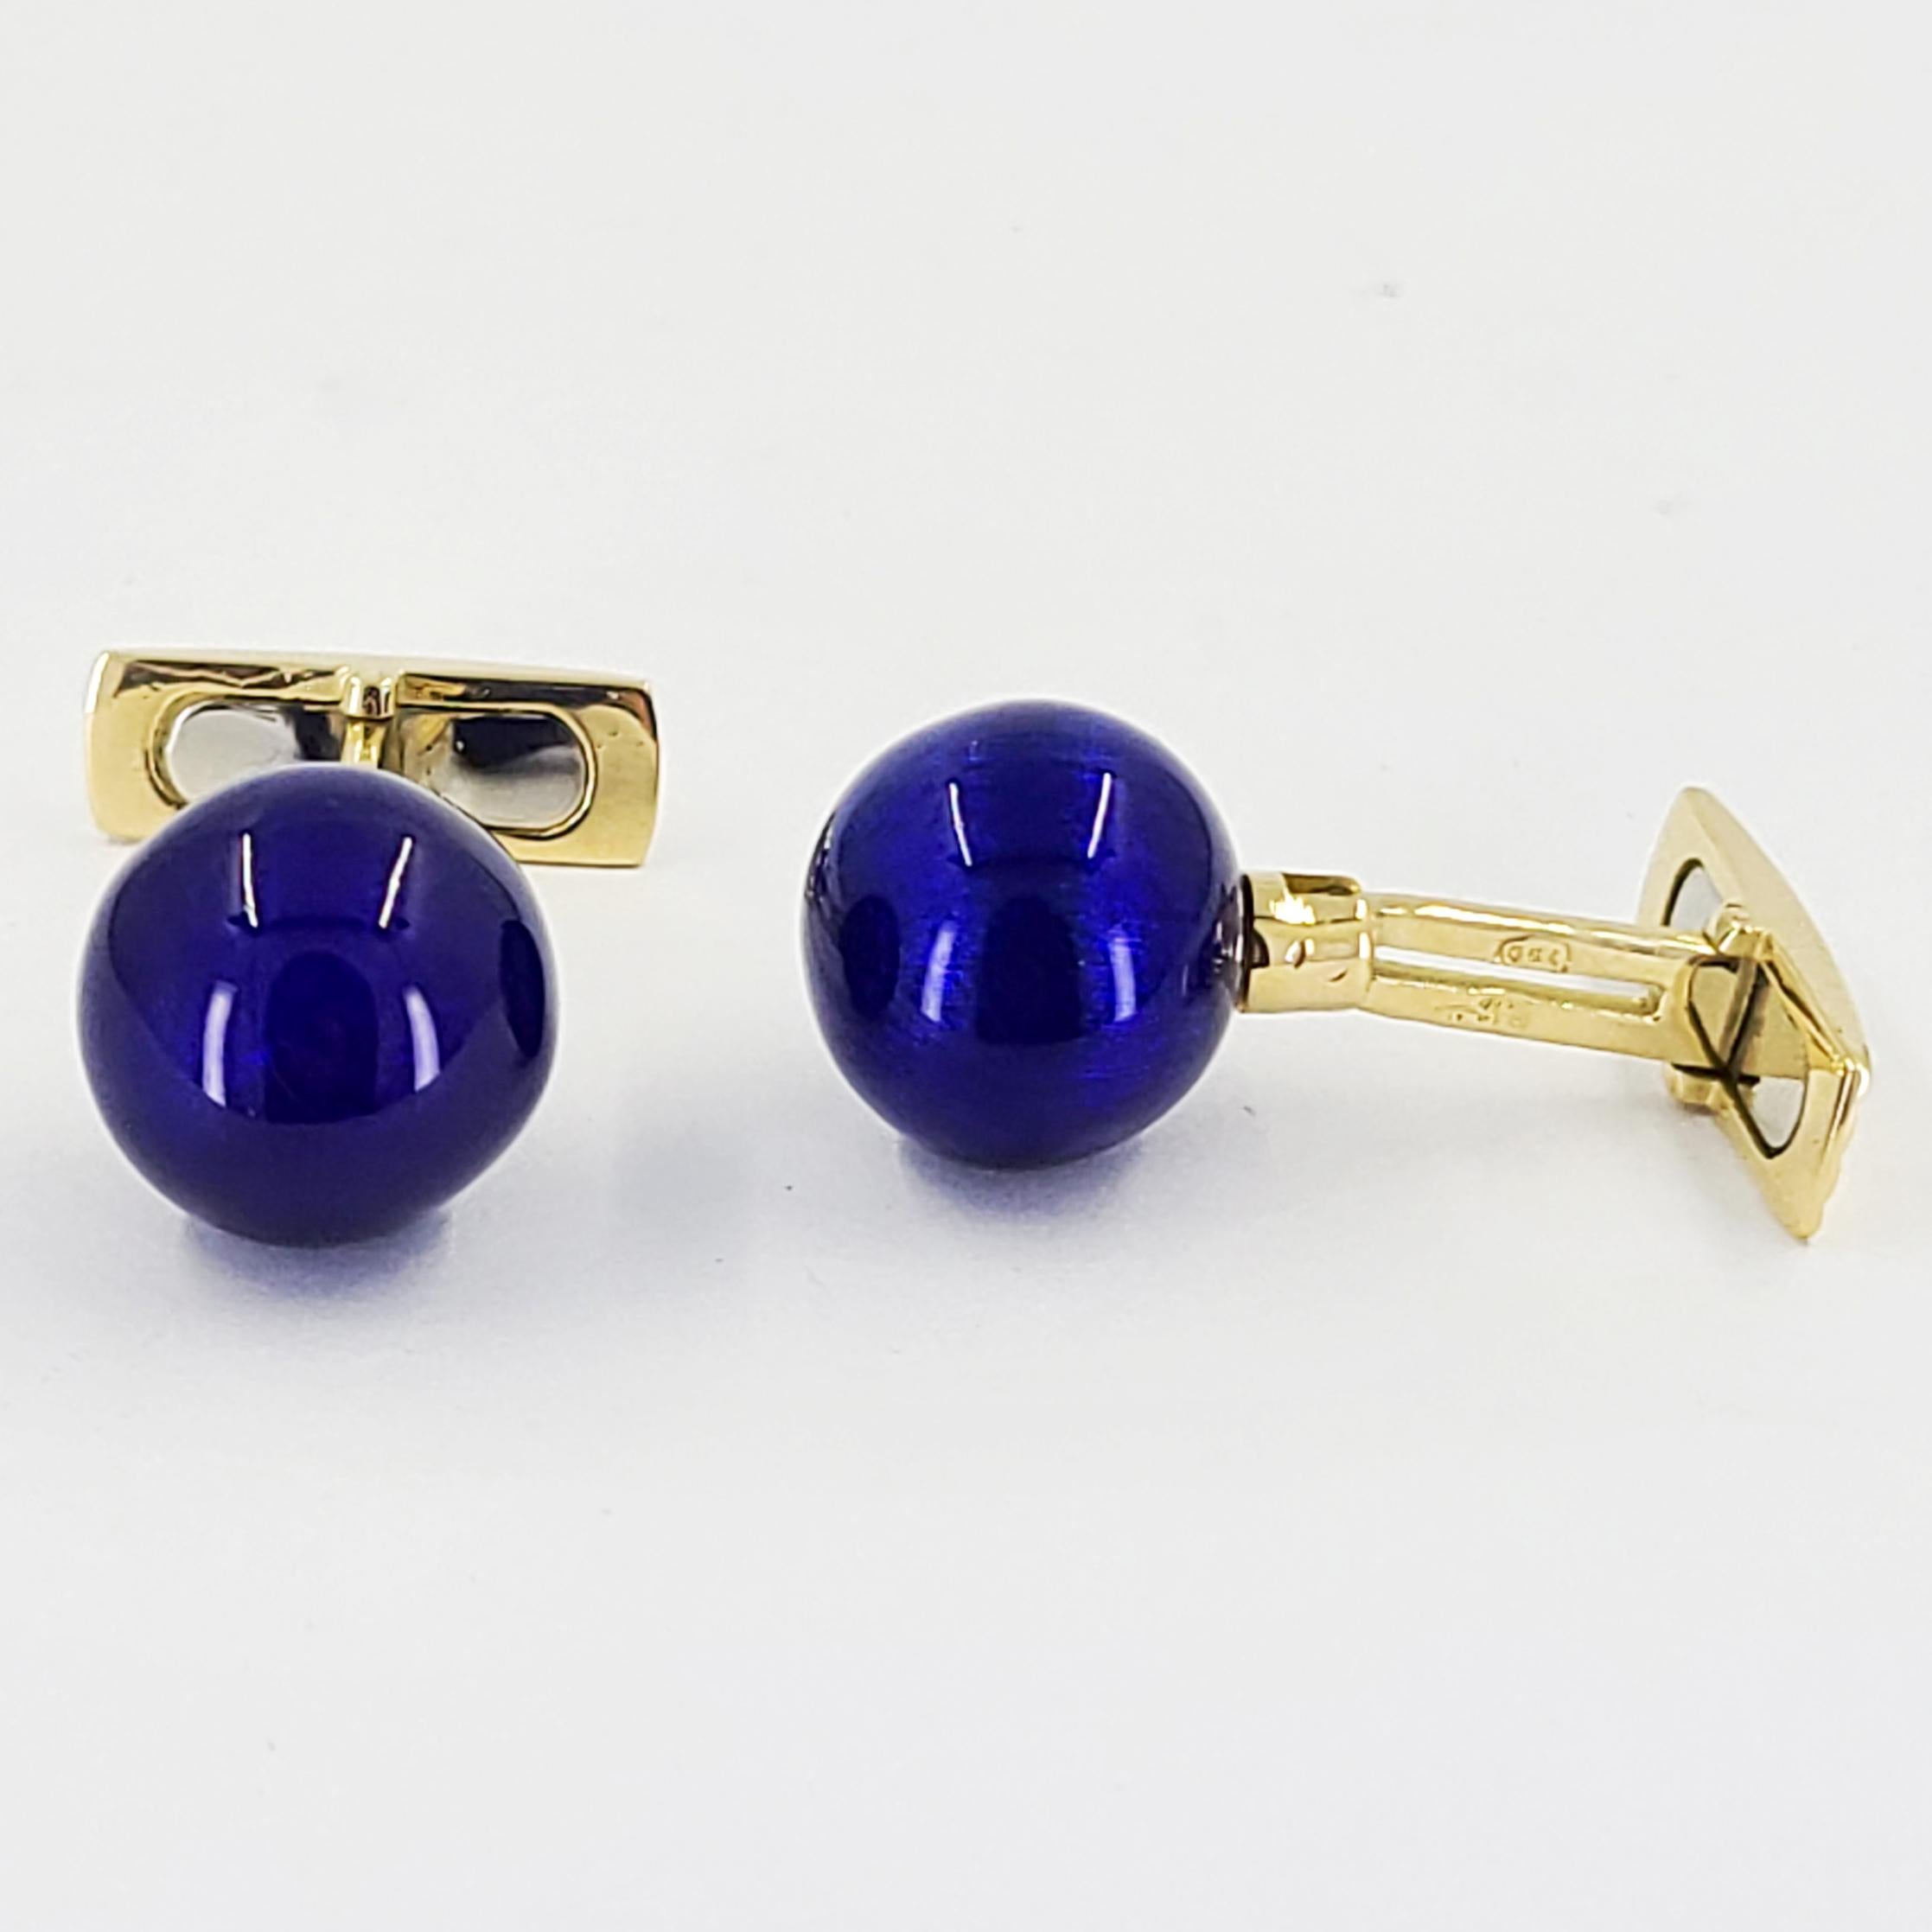 Yellow Gold & Blue Enamel Round Cufflinks In Good Condition For Sale In Coral Gables, FL